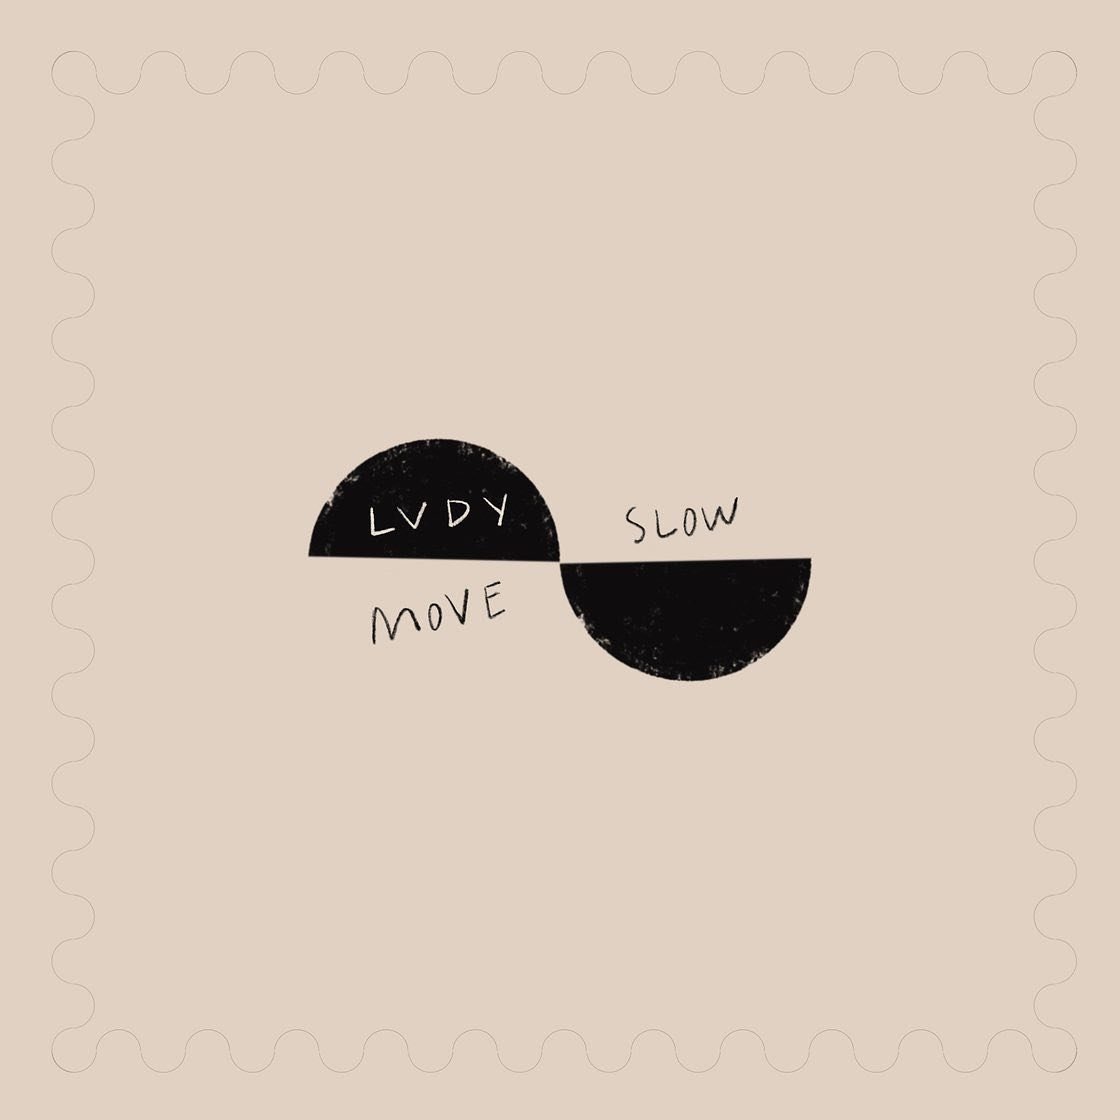 move over &lsquo;Dear Sun&rsquo; I have a new favorite @lvdy.music hit&hellip;

&lsquo;Move Slow&rsquo; is out today!

and as always, I&rsquo;m honored to share my drawings with your creativity @aub.lane @kathleenhooper 💛

#sketches #denver #colorad